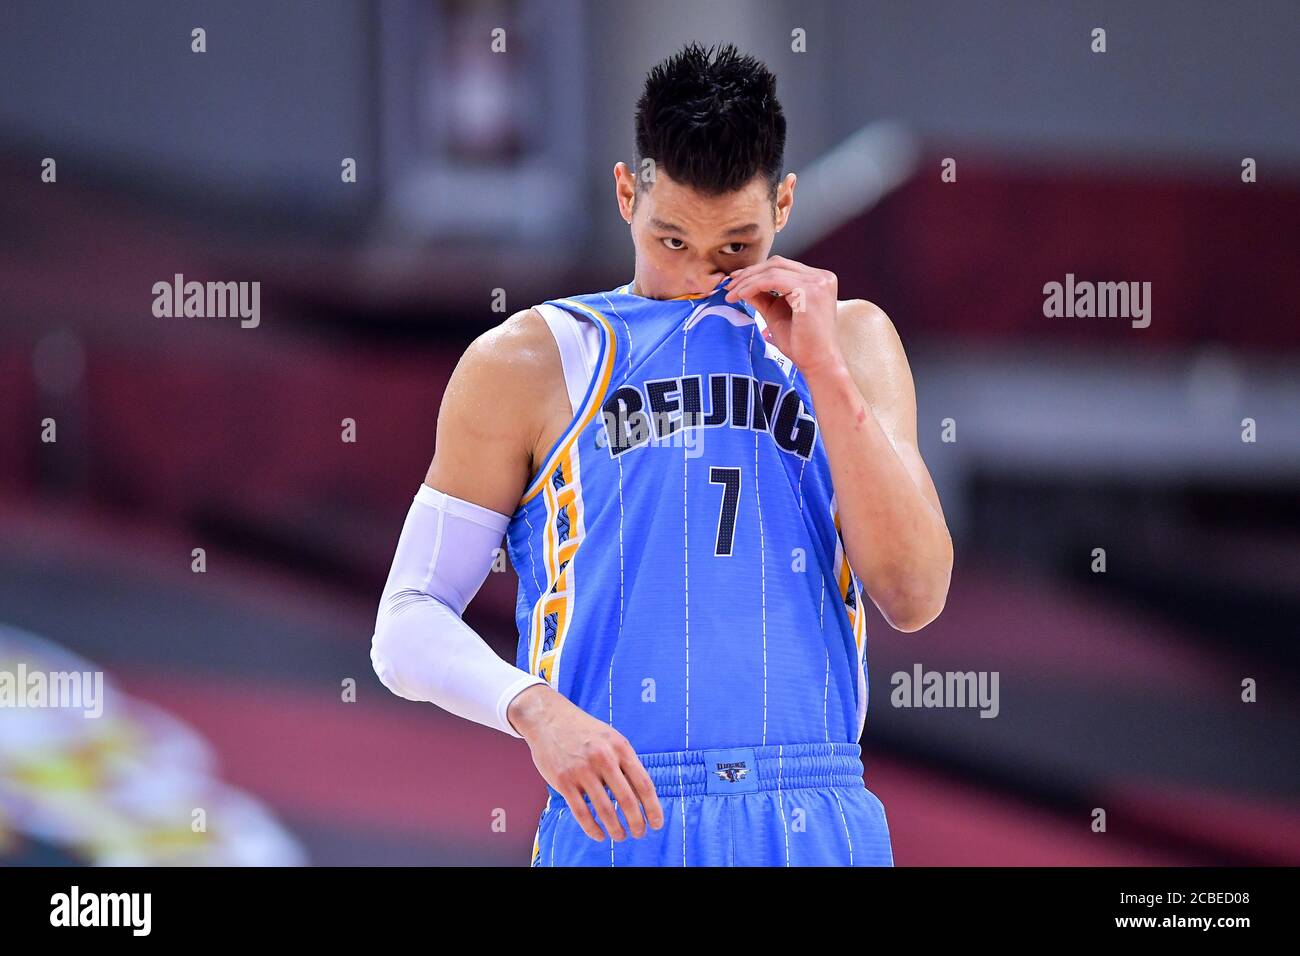 American professional basketball player Jeremy Lin for the Beijing Ducks of the Chinese Basketball Association (CBA) bleeds as he gets hurt during a playoff game against Guangdong Hongyuan Southern Tigers, Qingdao city, east China's Shandong province, 8 August 2020. Stock Photo